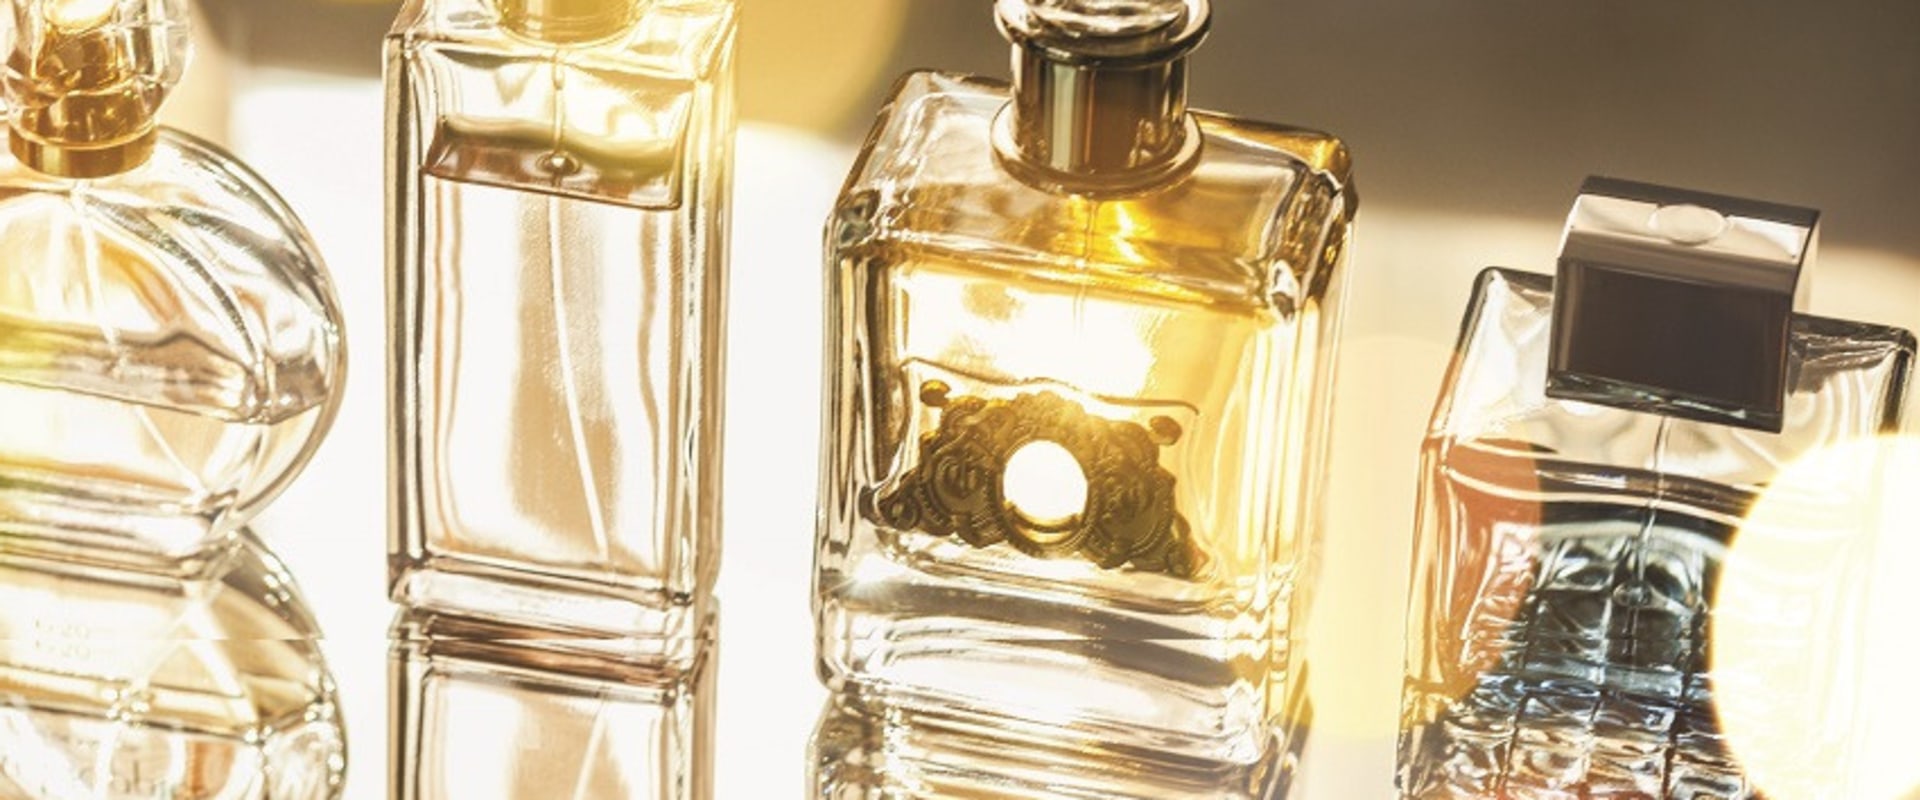 Pros and Cons of New Niche Fragrances